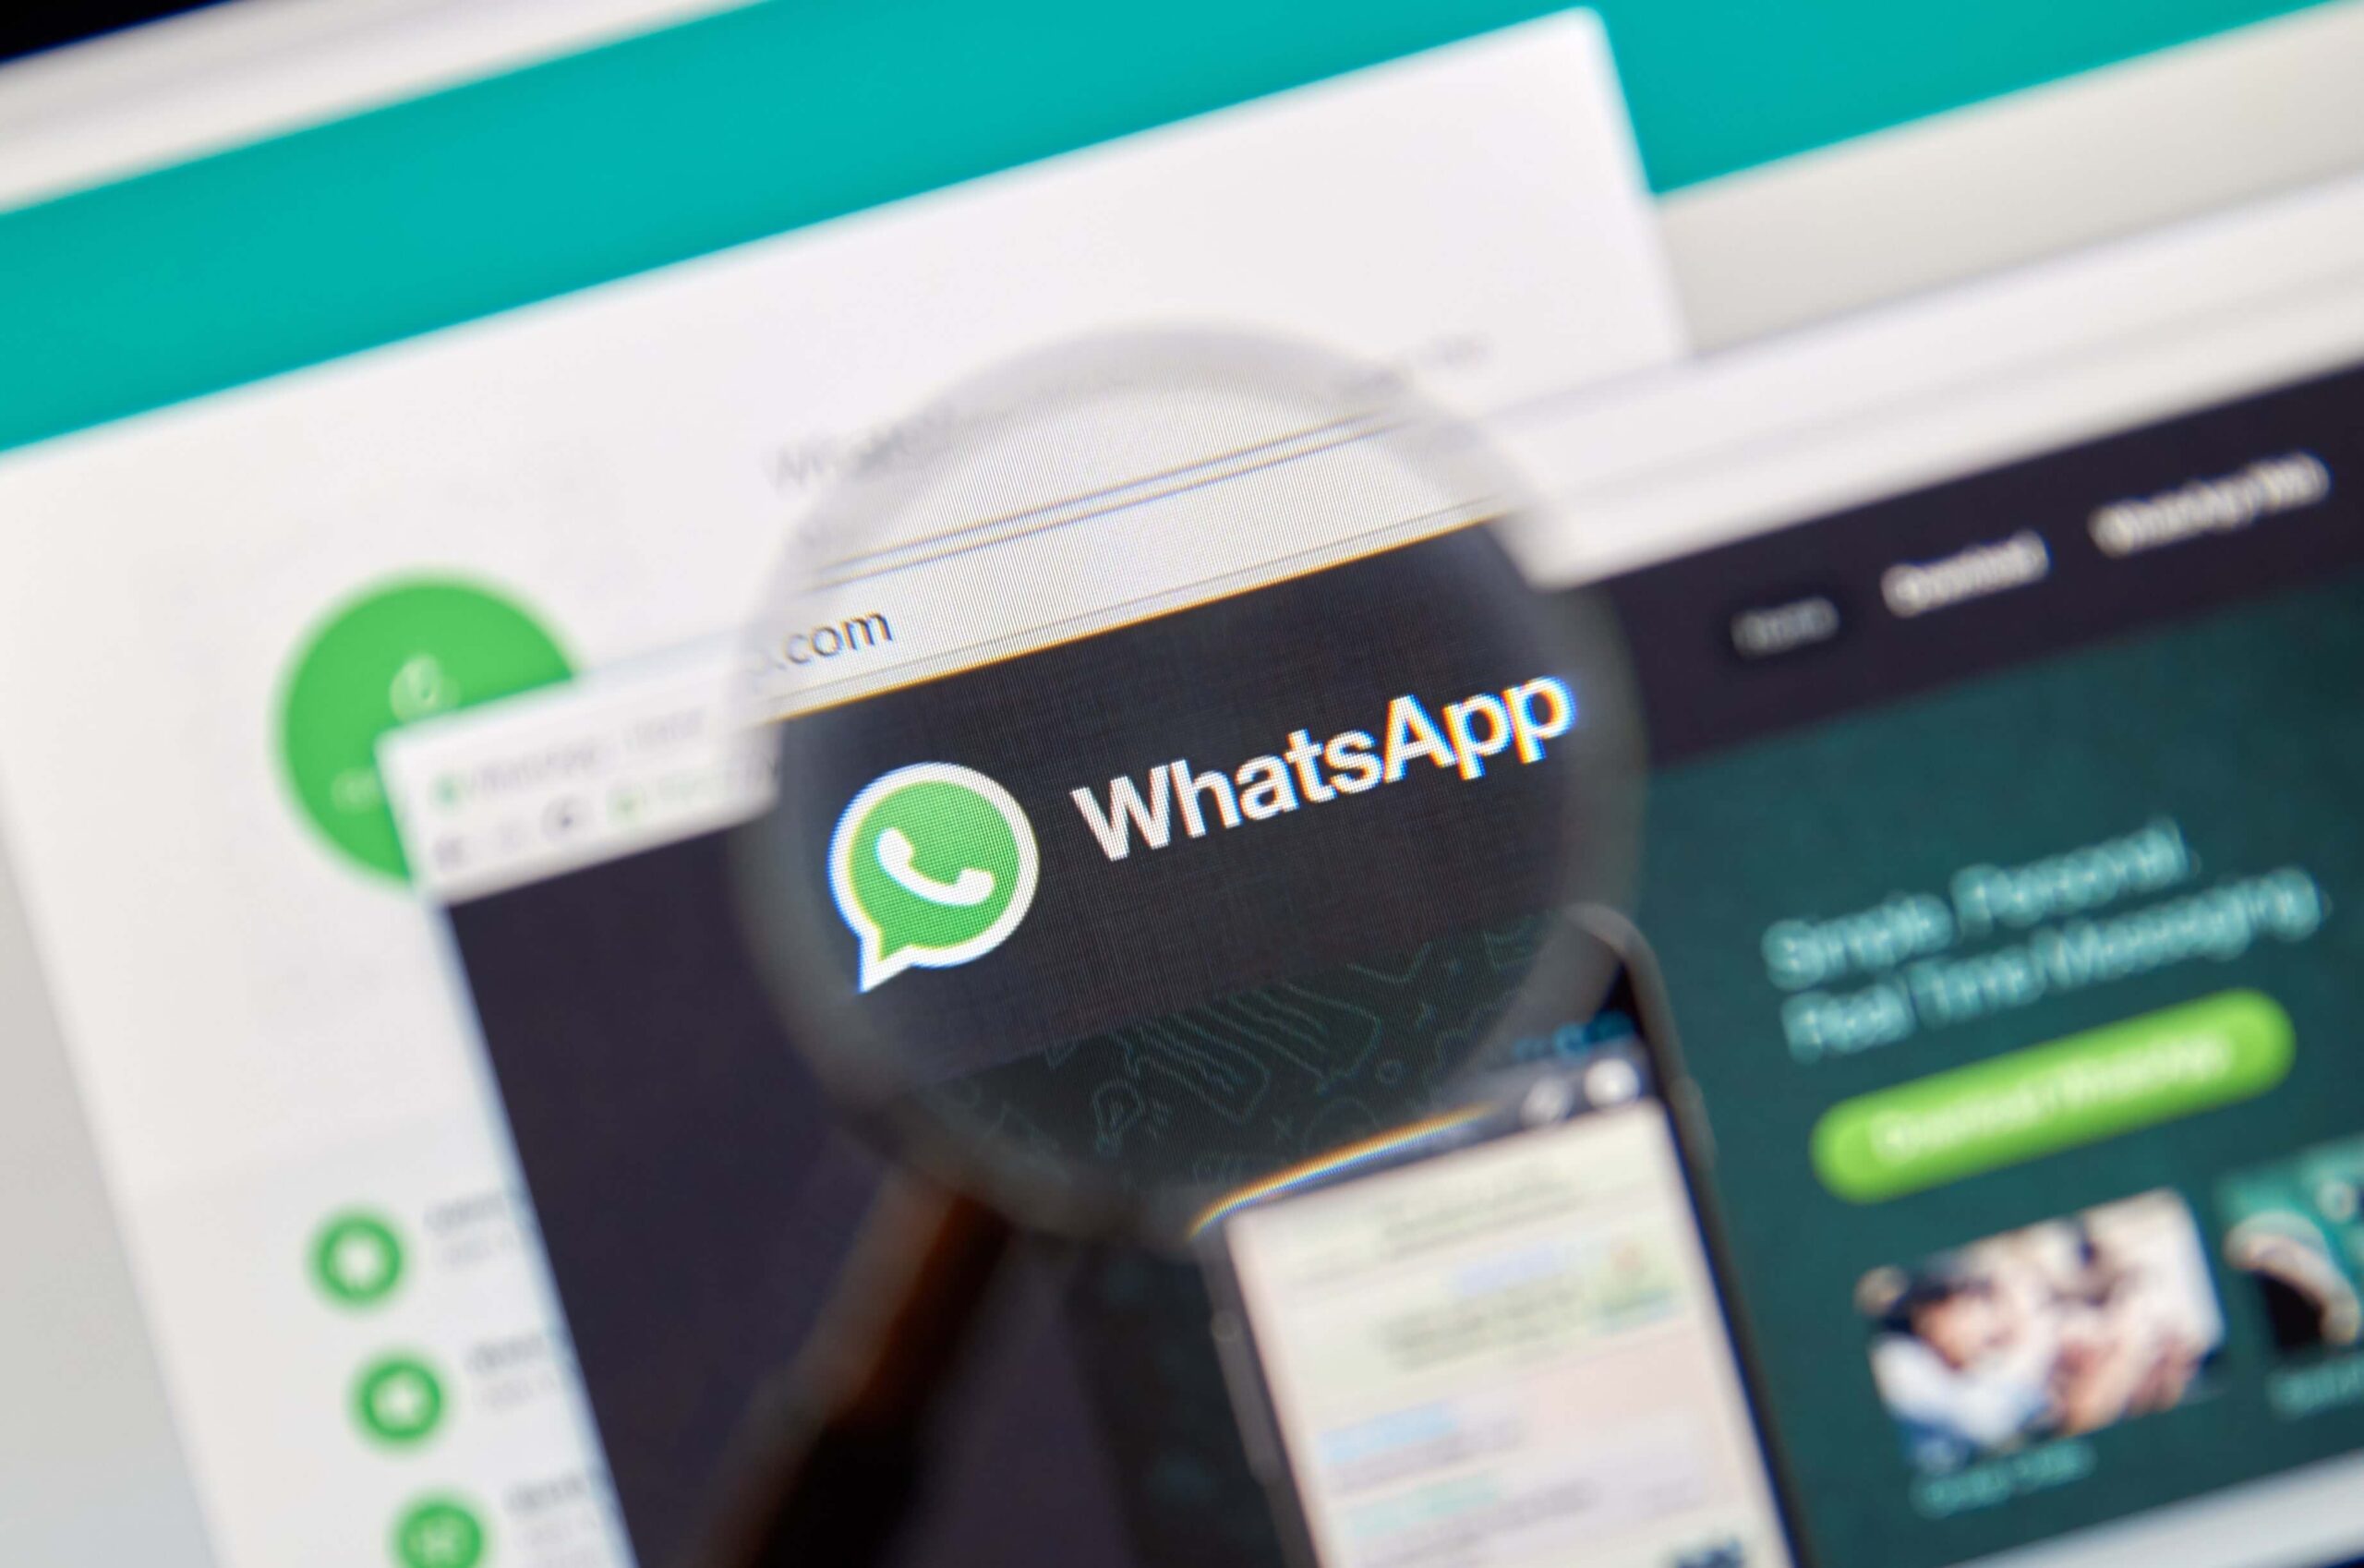 Can sectional title trustees take resolutions via whatsapp?